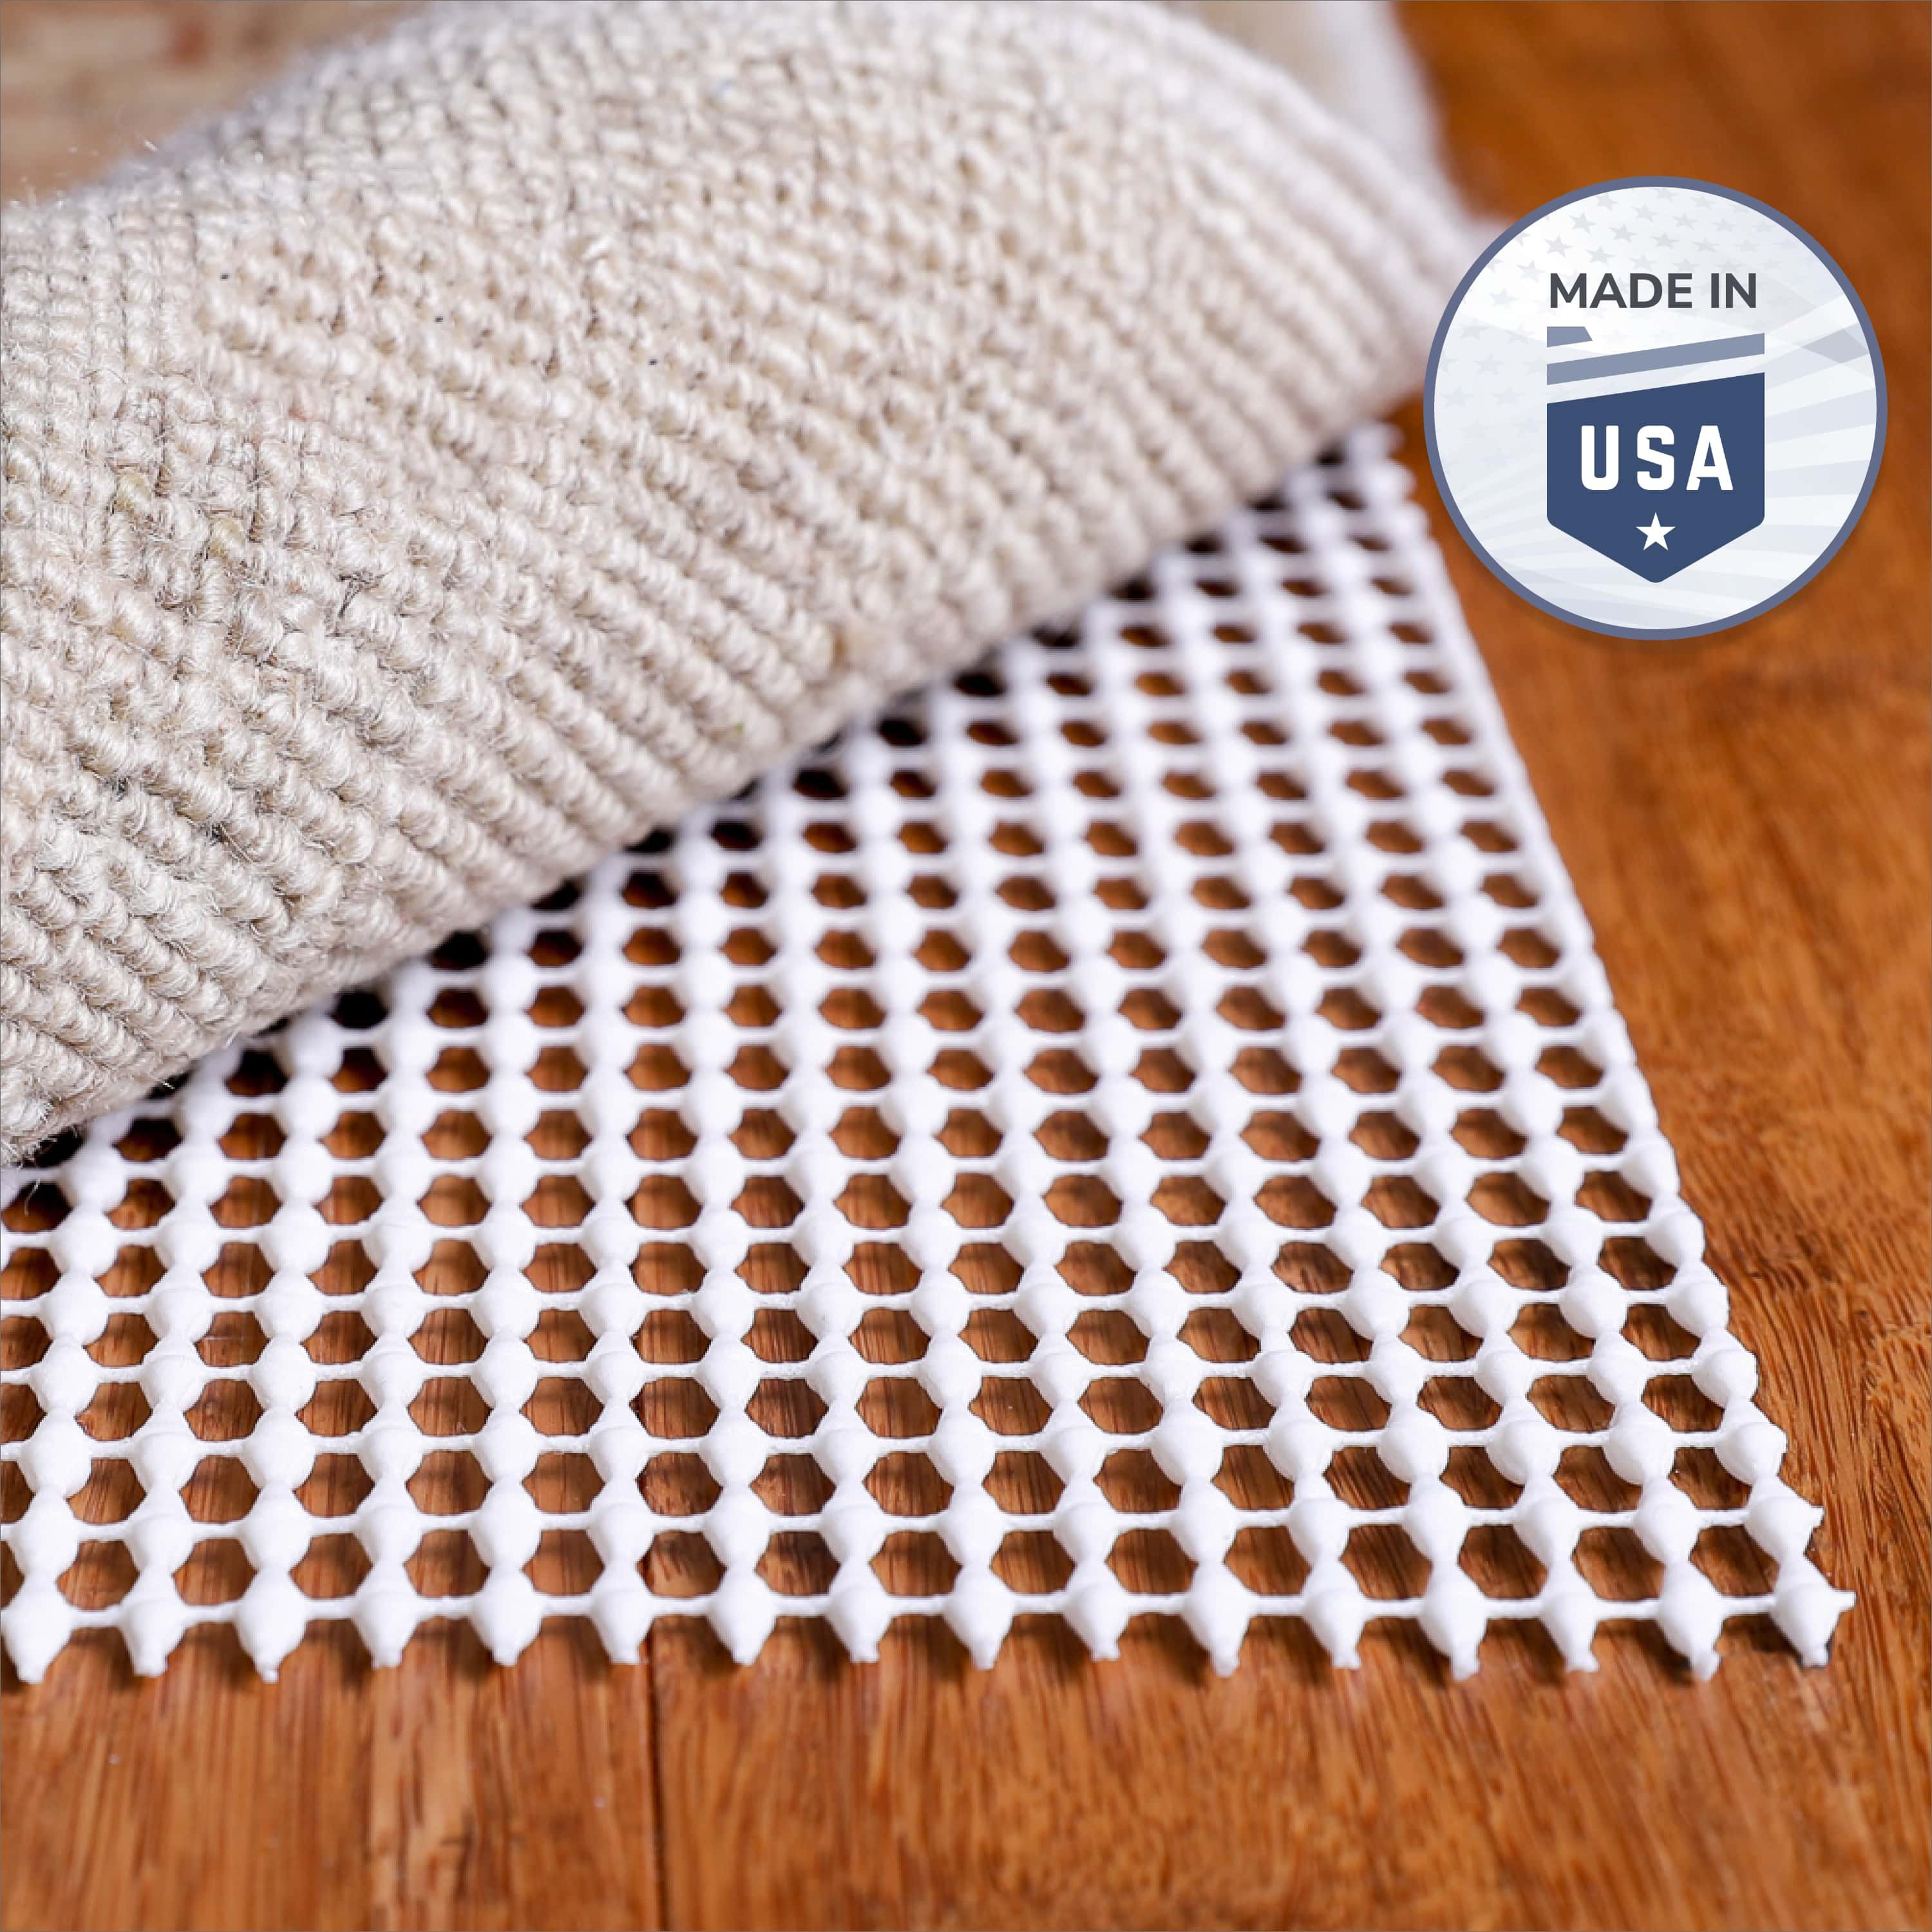 5x7 Anti Slip Area Rug Pad for Any Hard Surface Floors Rug Gripper for  Hardwood Floors Keep Your Rugs Safe and in Place